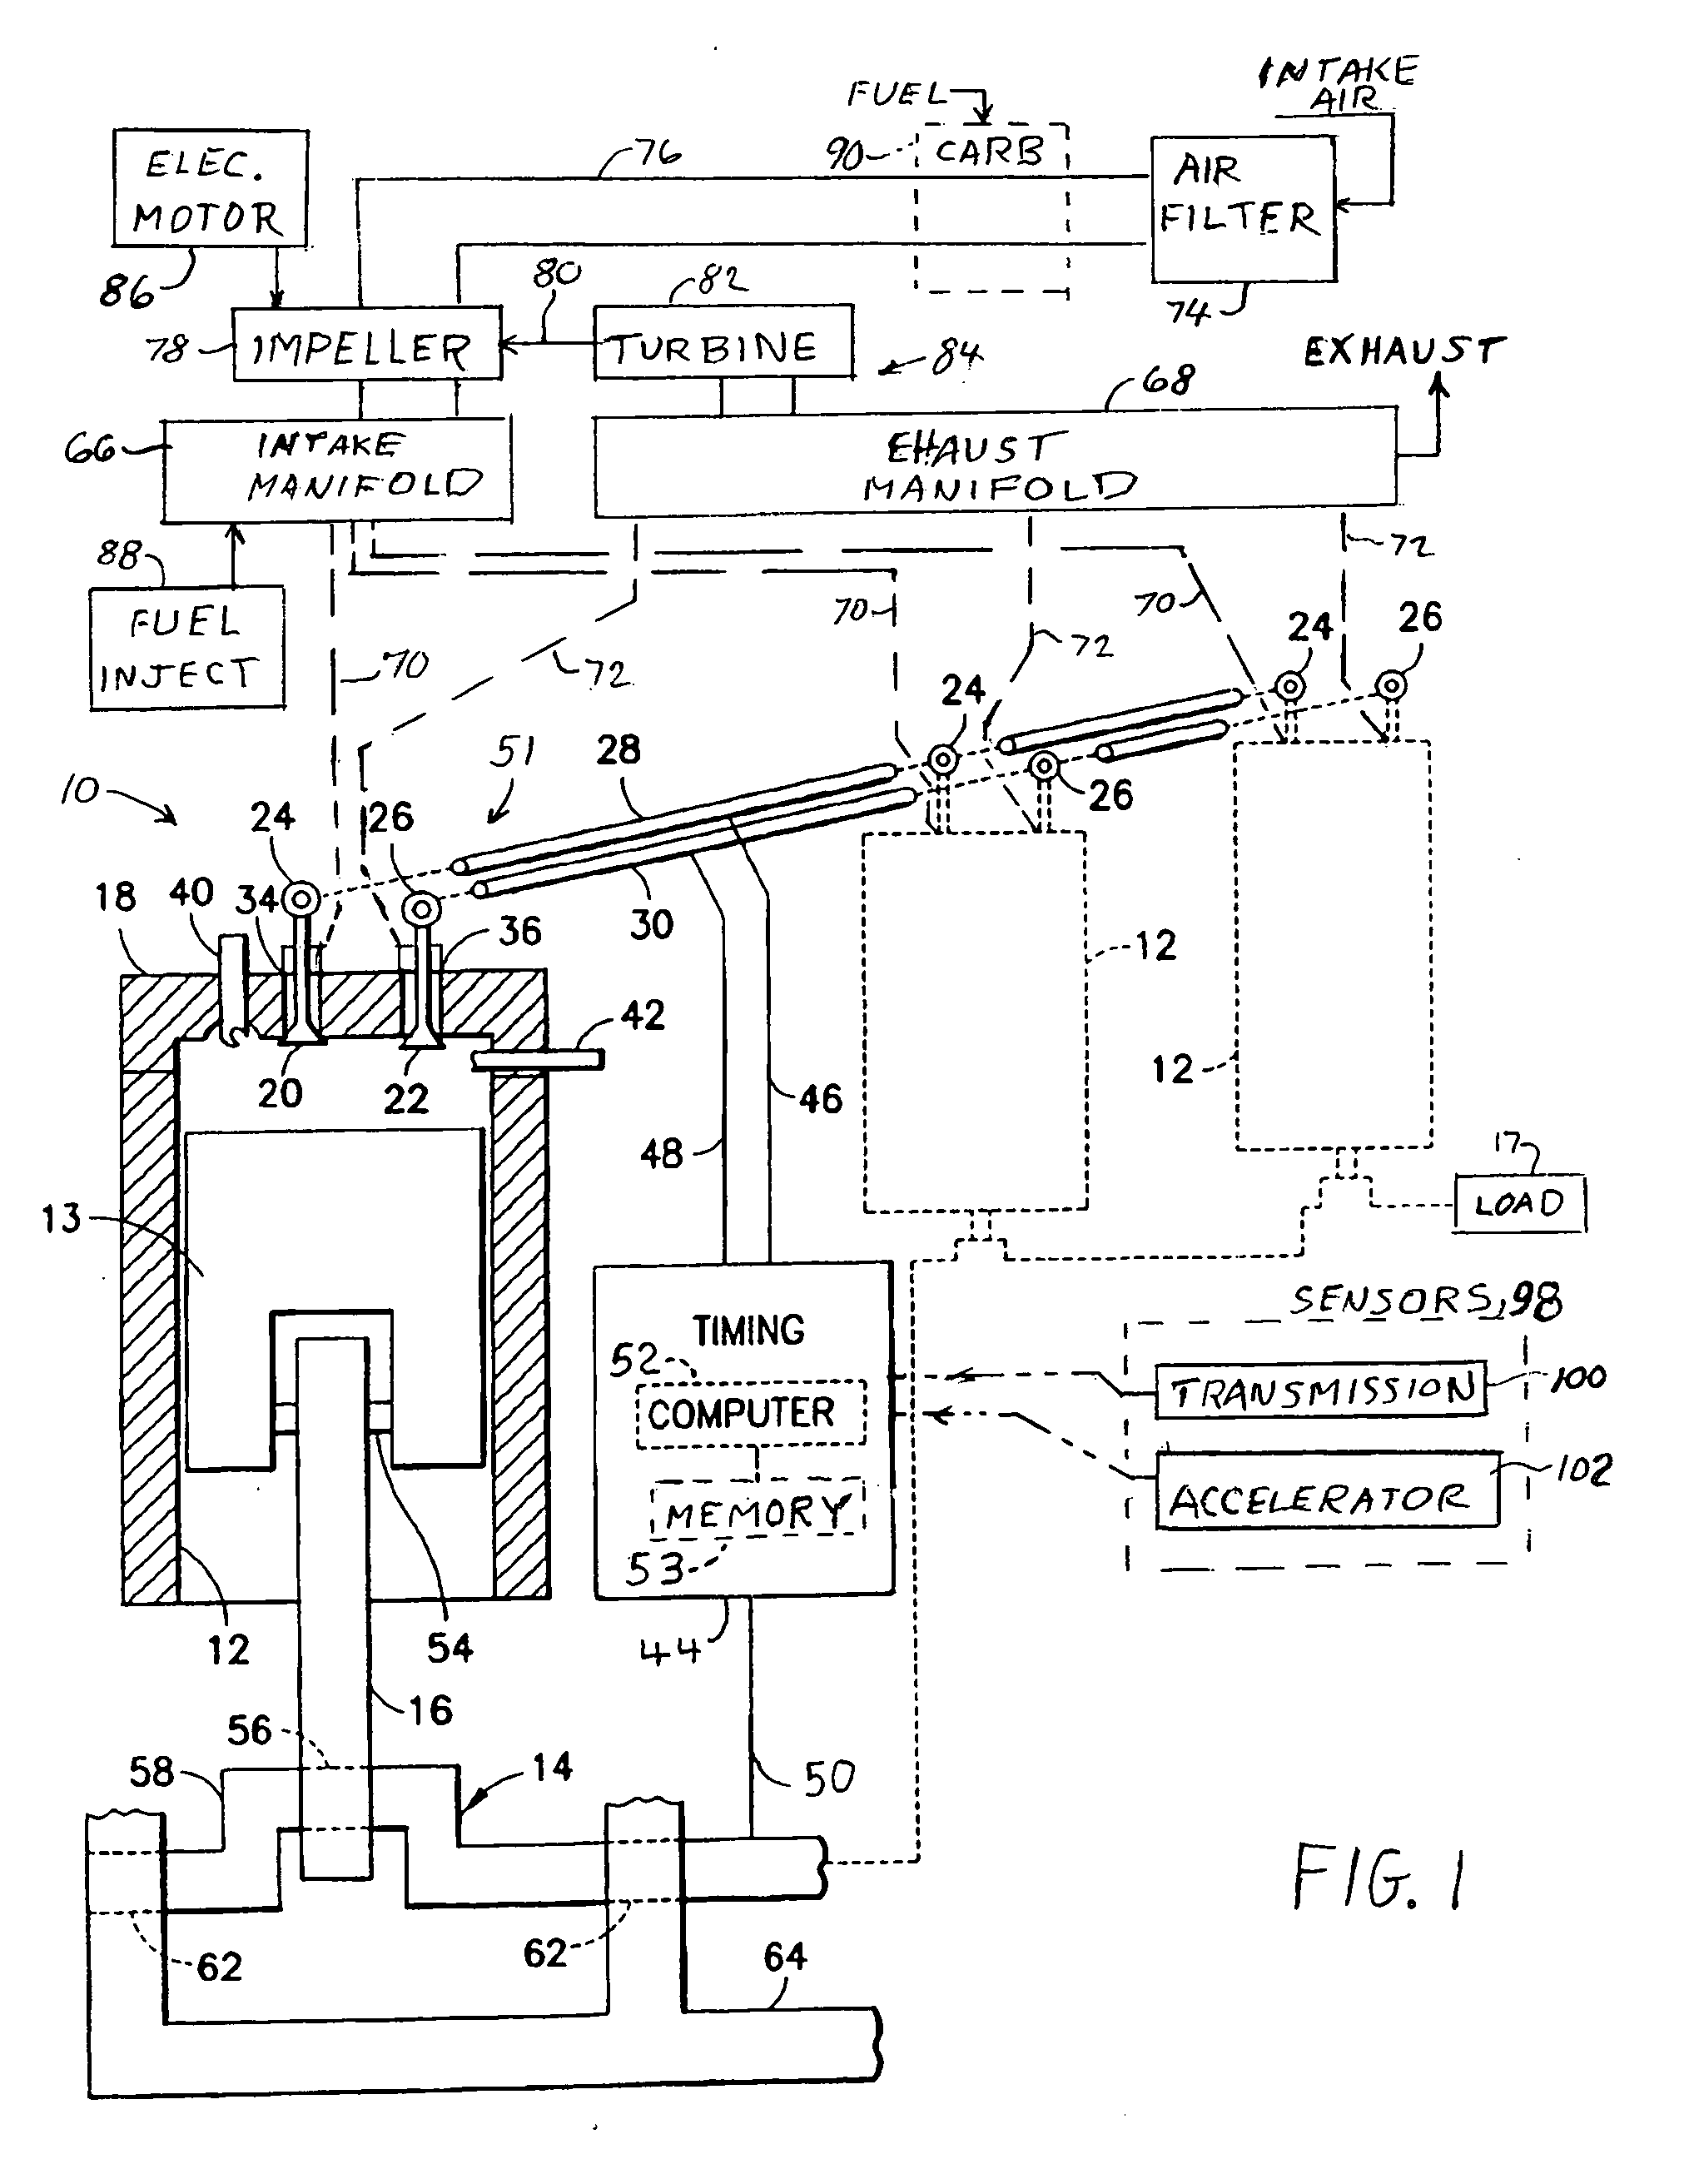 Two-stroke internal combustion engine with valves for improved fuel efficiency